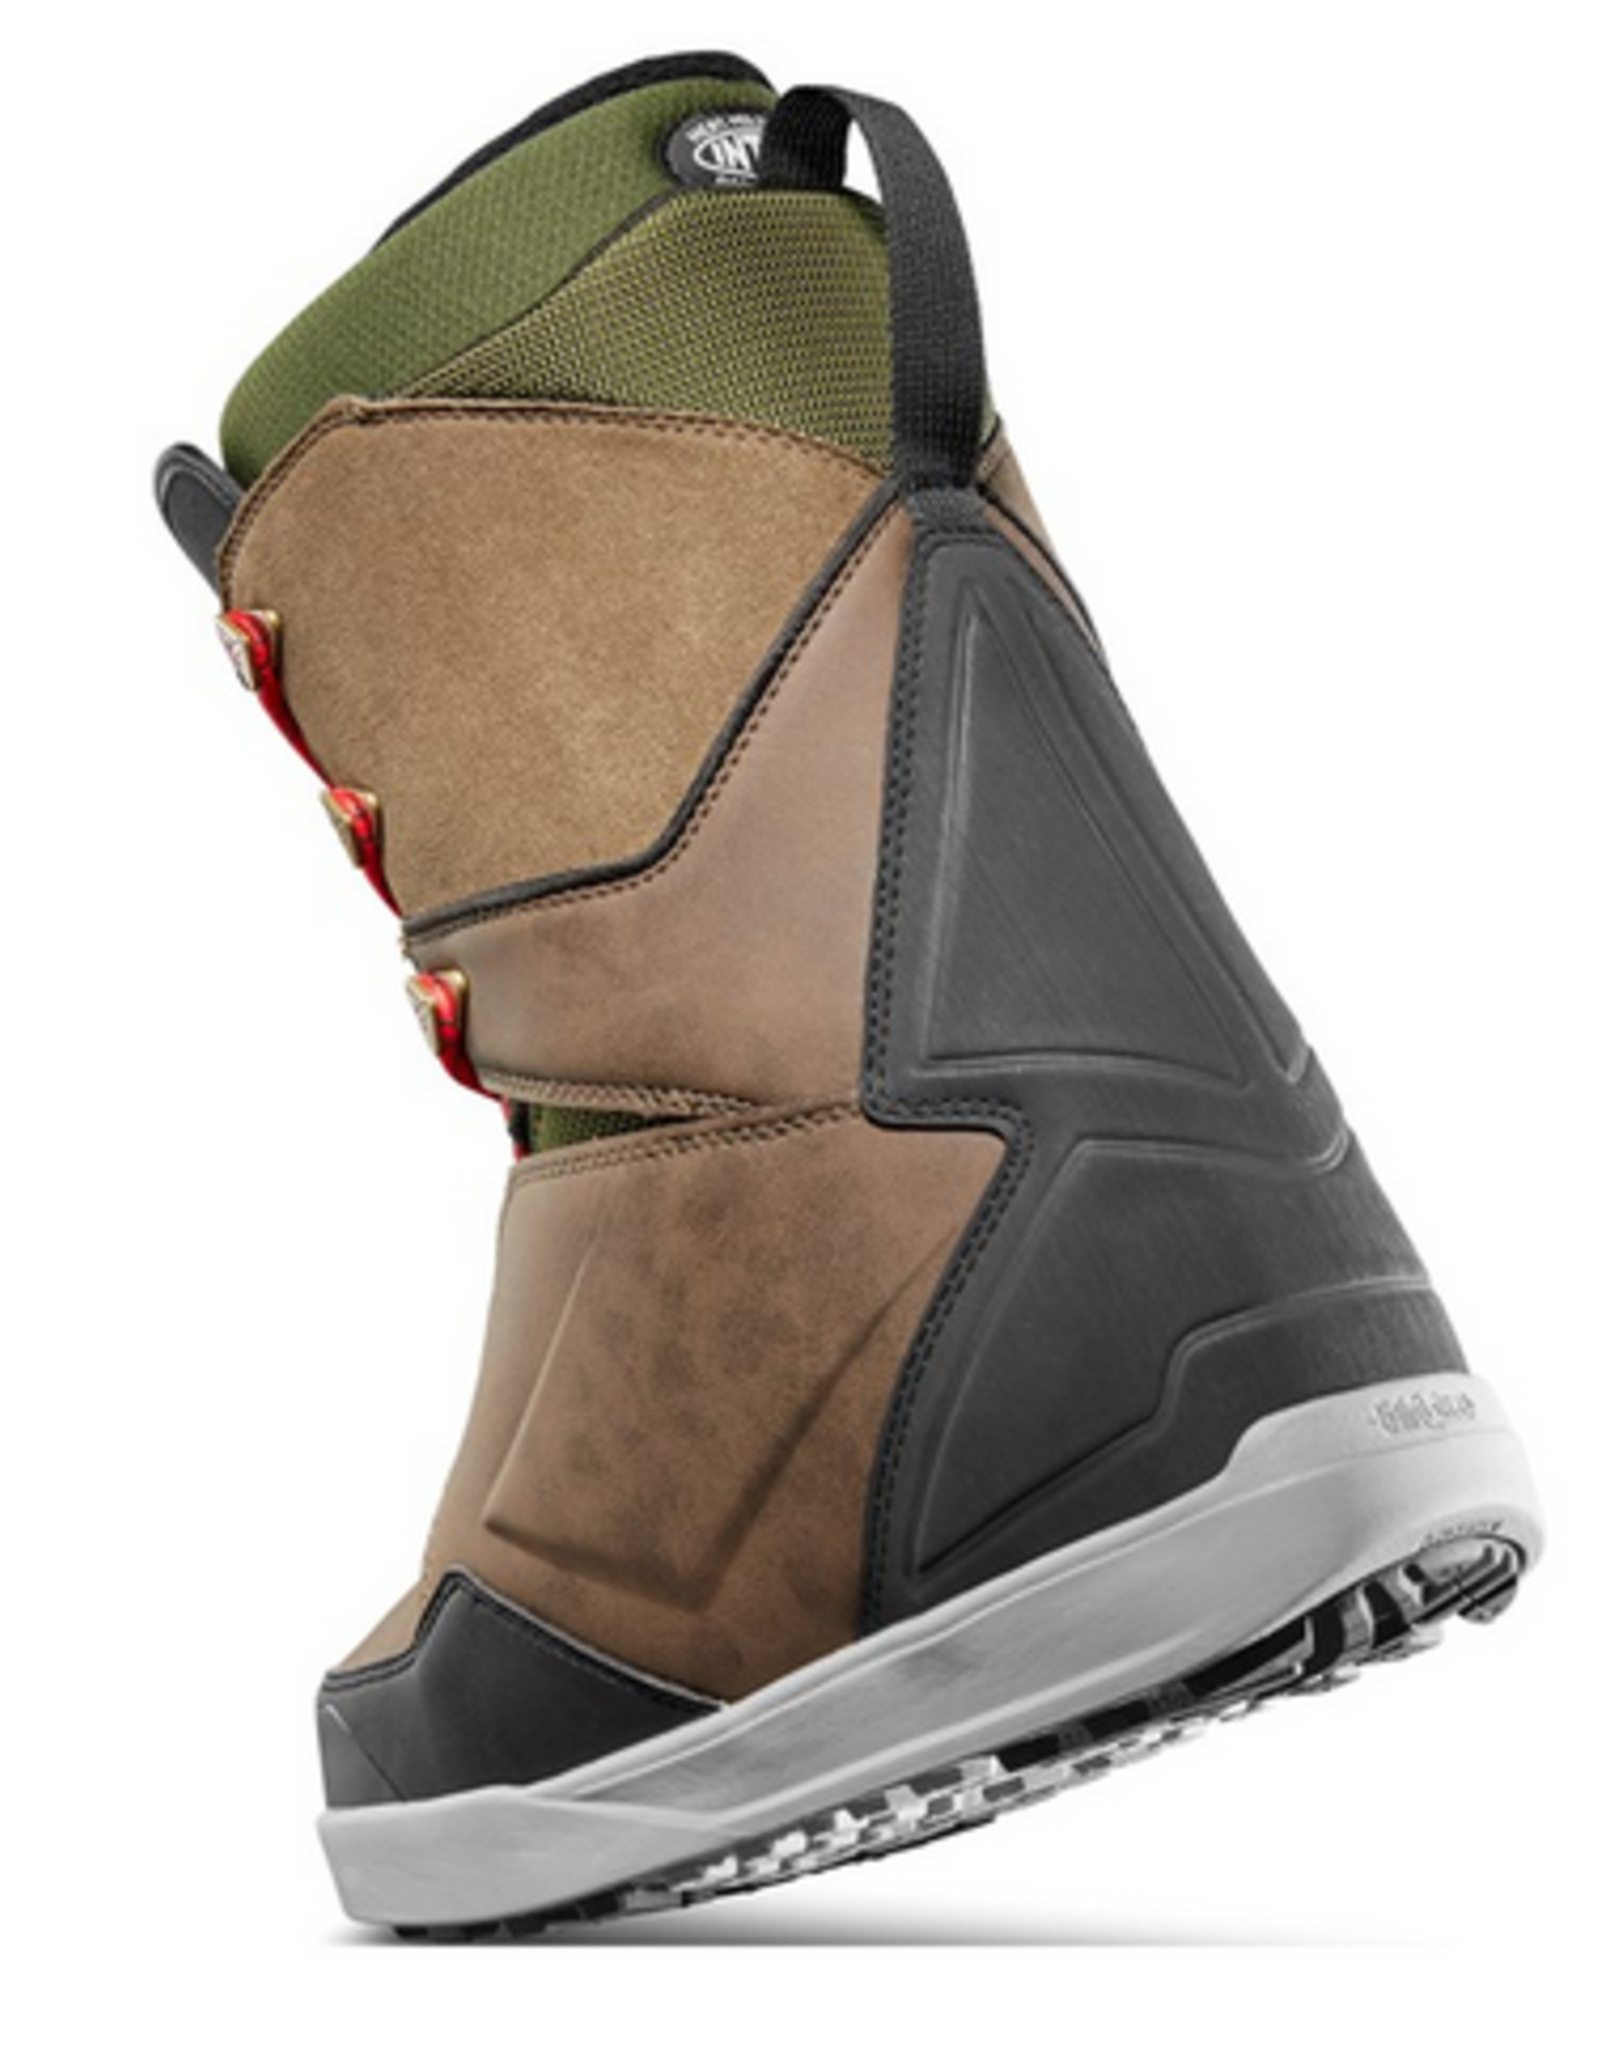 32 THIRTY TWO 2023 LASHED BRADHSAW SNOWBOARD BOOTS